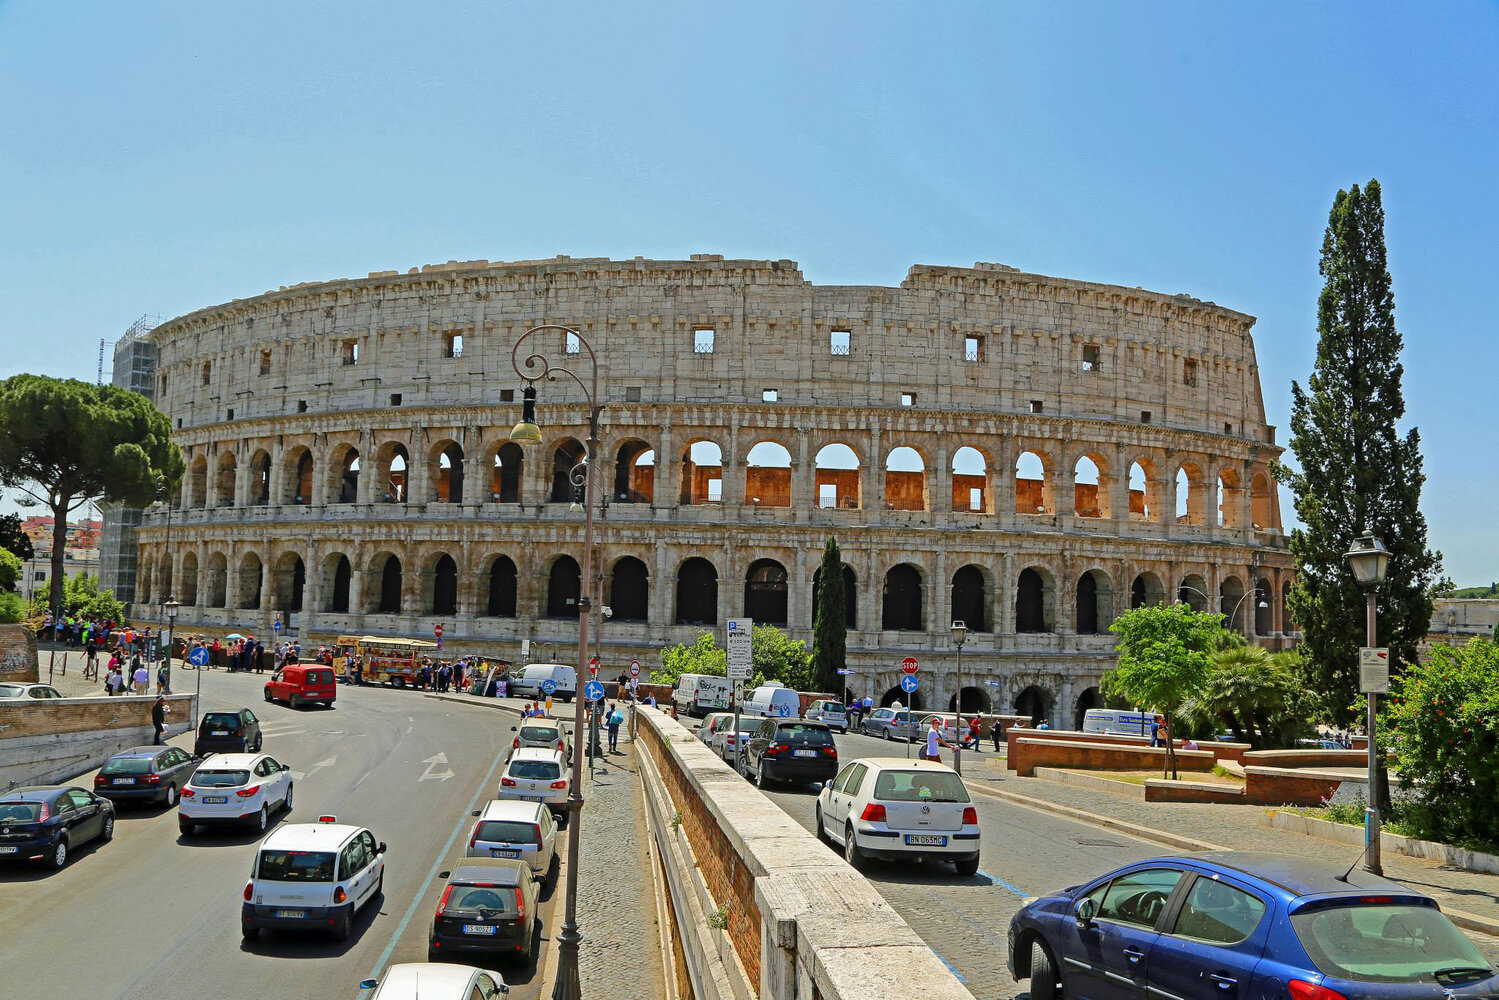 The photo the Colosseum was taken in May 2015 in Rome, Italy.